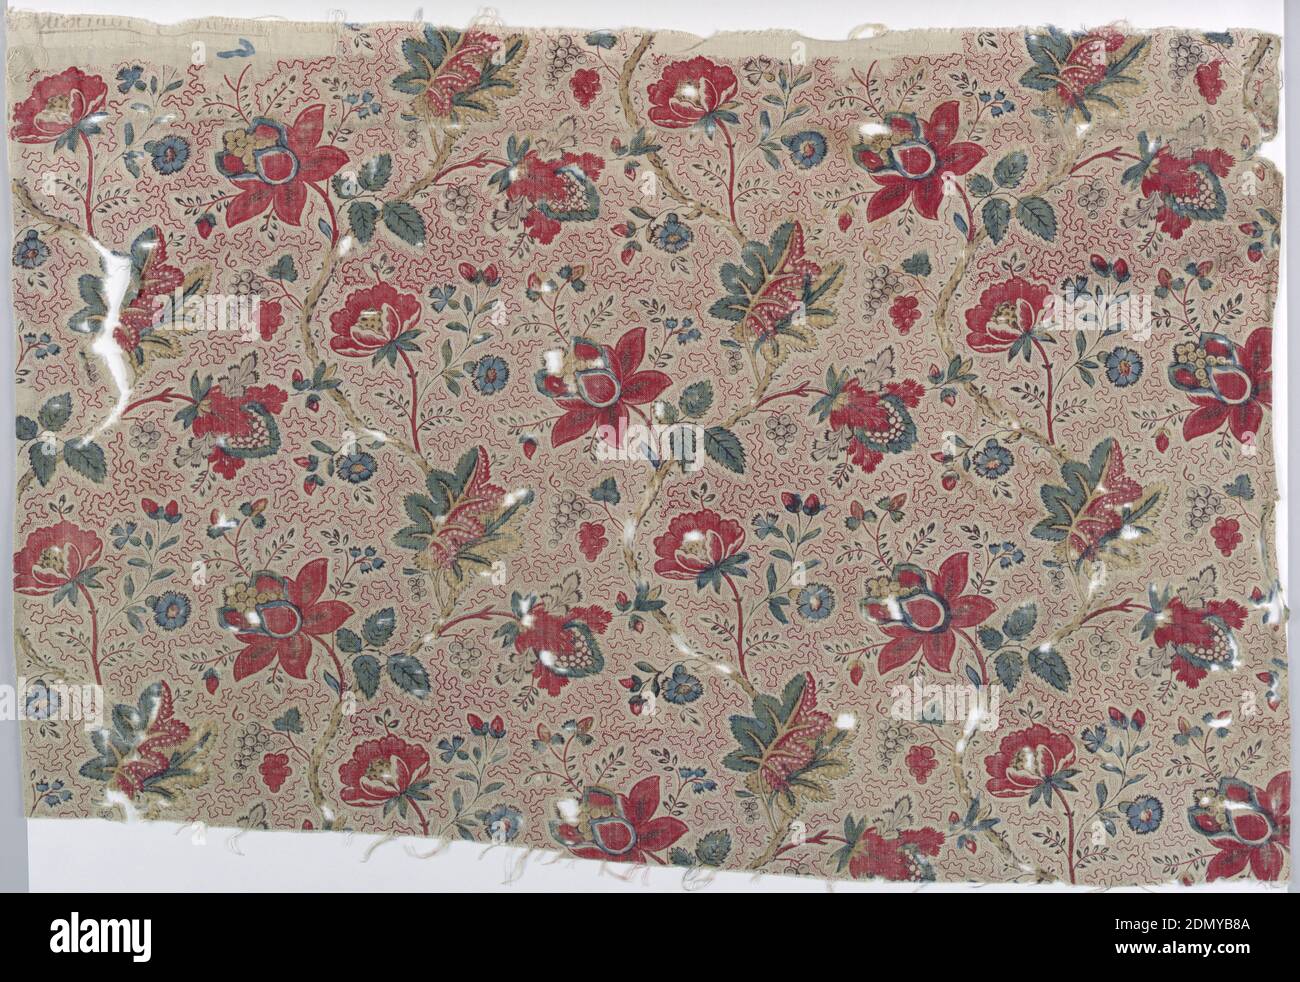 Textile, Medium: linen warp, cotton weft Technique: block printed on plain weave, Polychrome design of flowers and stems on a vermicular background., France, 1785–95, printed, dyed & painted textiles, Textile Stock Photo